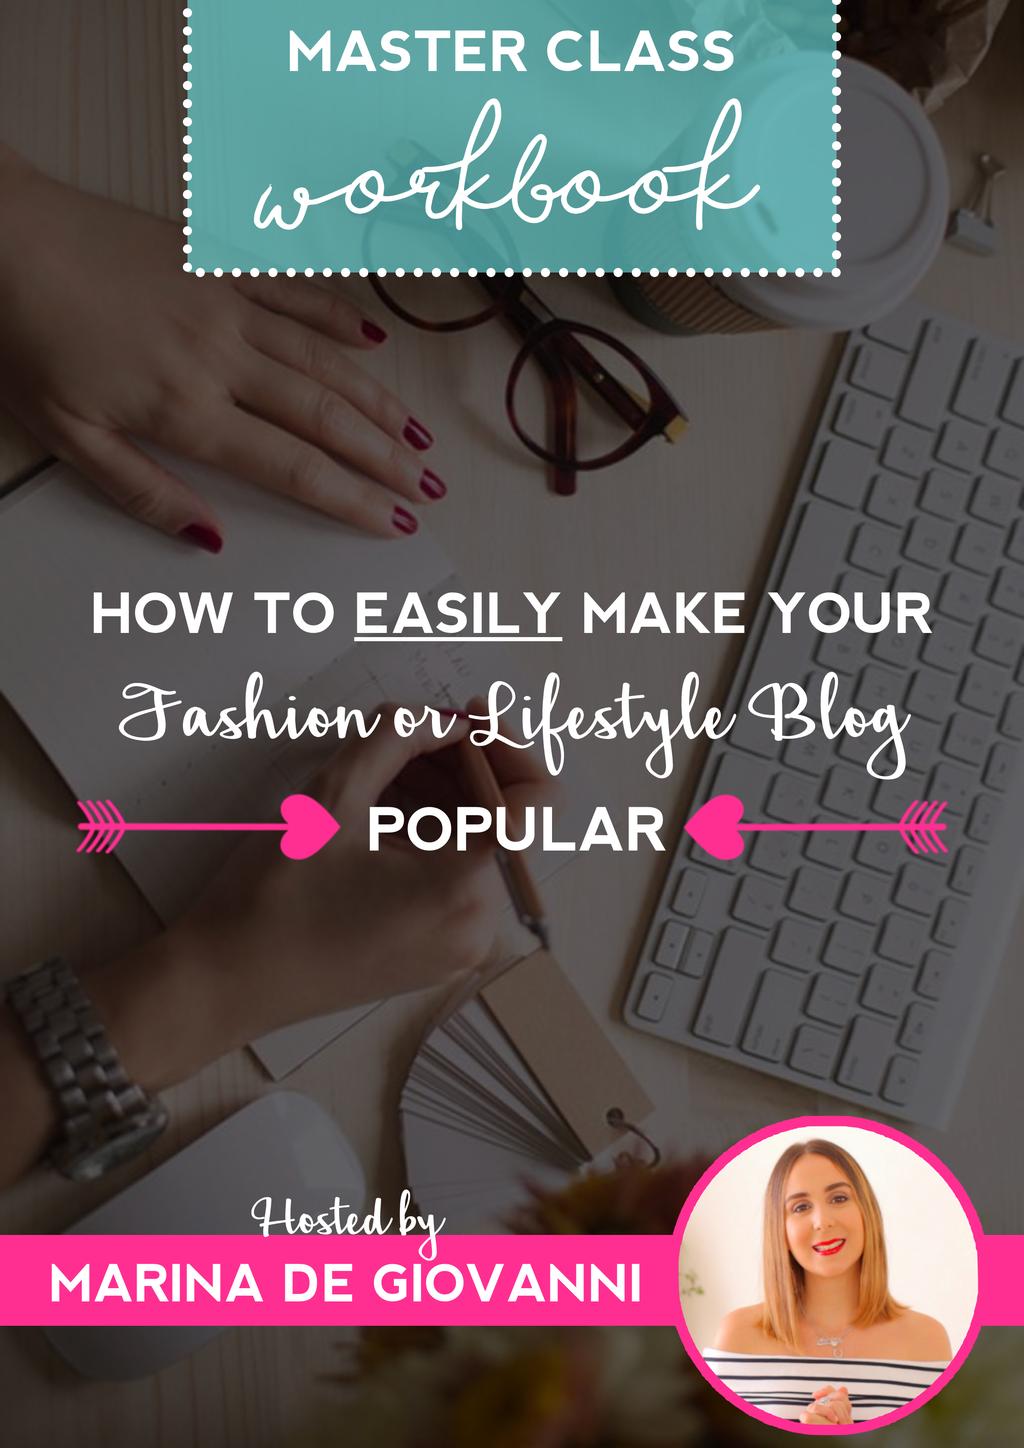 WORKBOOK: HOW TO EASILY MAKE YOUR FASHION OR